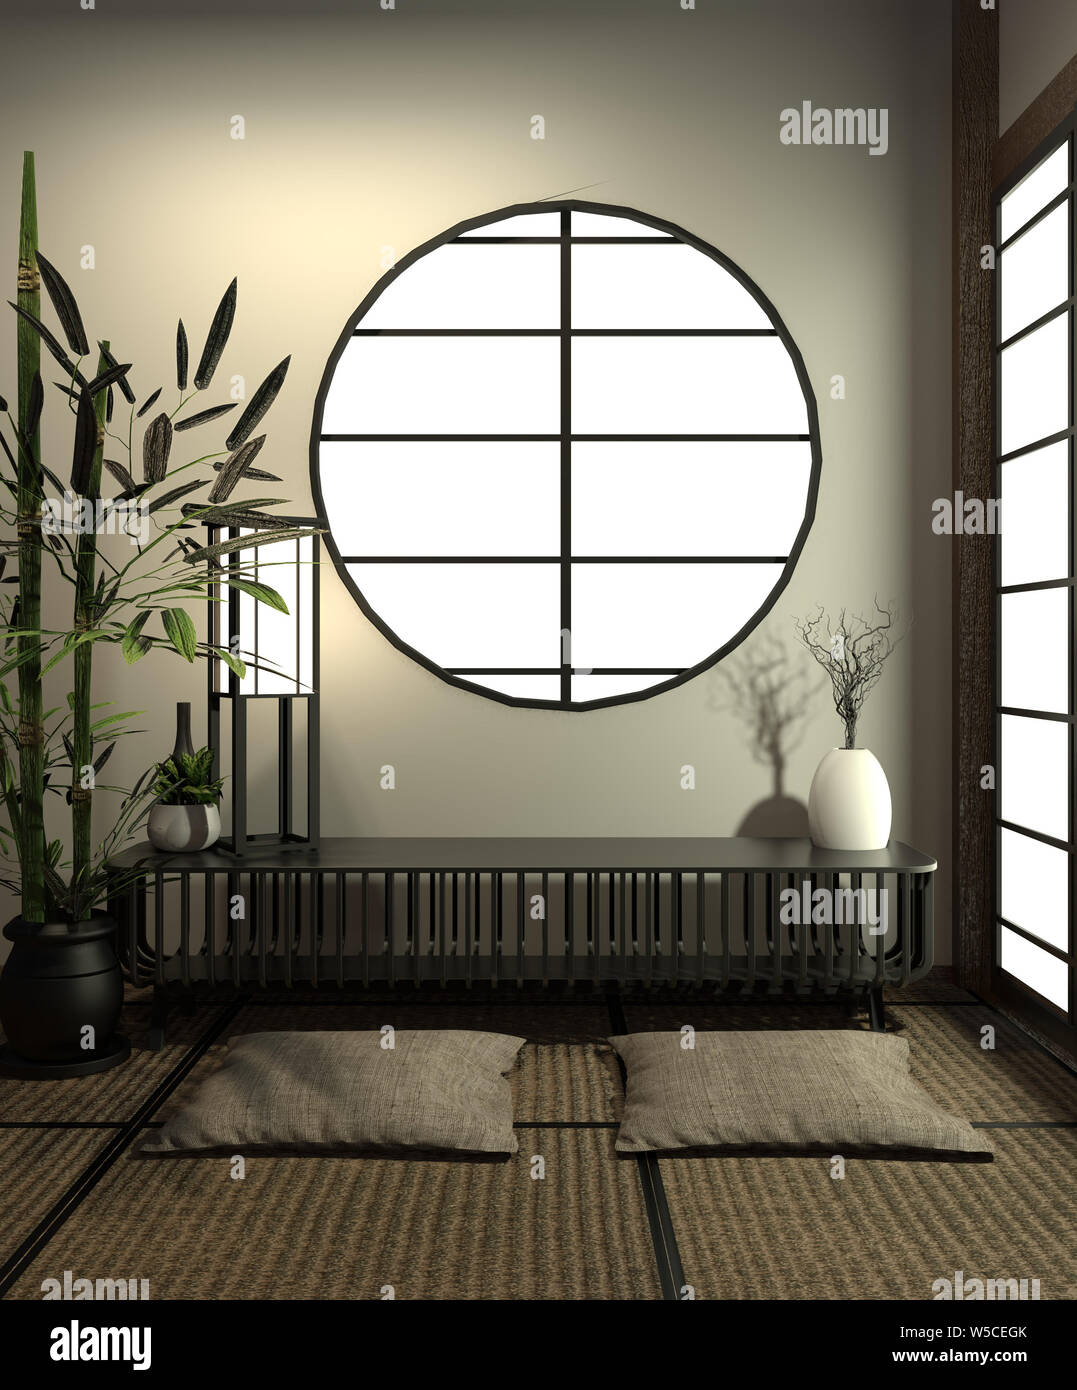 Room minimal design with Tatami mat floor and decoration Japanese style, empty room interior, 3D rendering Stock Photo